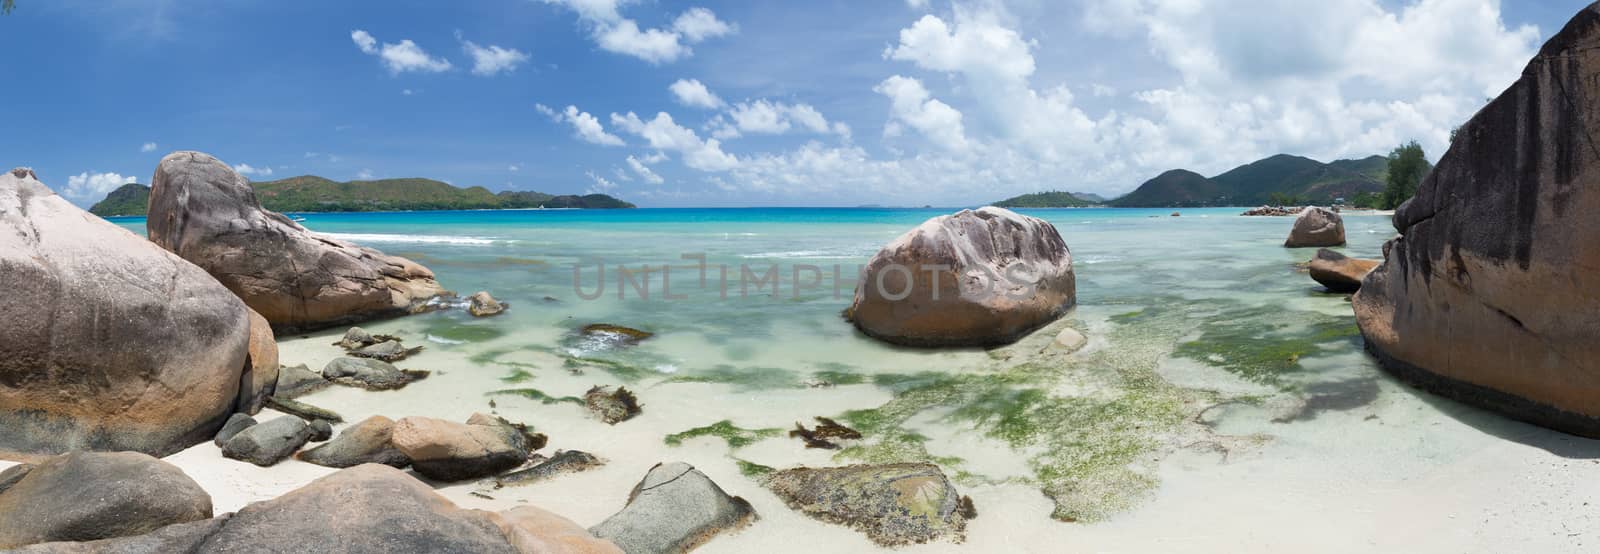 Big stones on the beach of the Seychelles by 25ehaag6